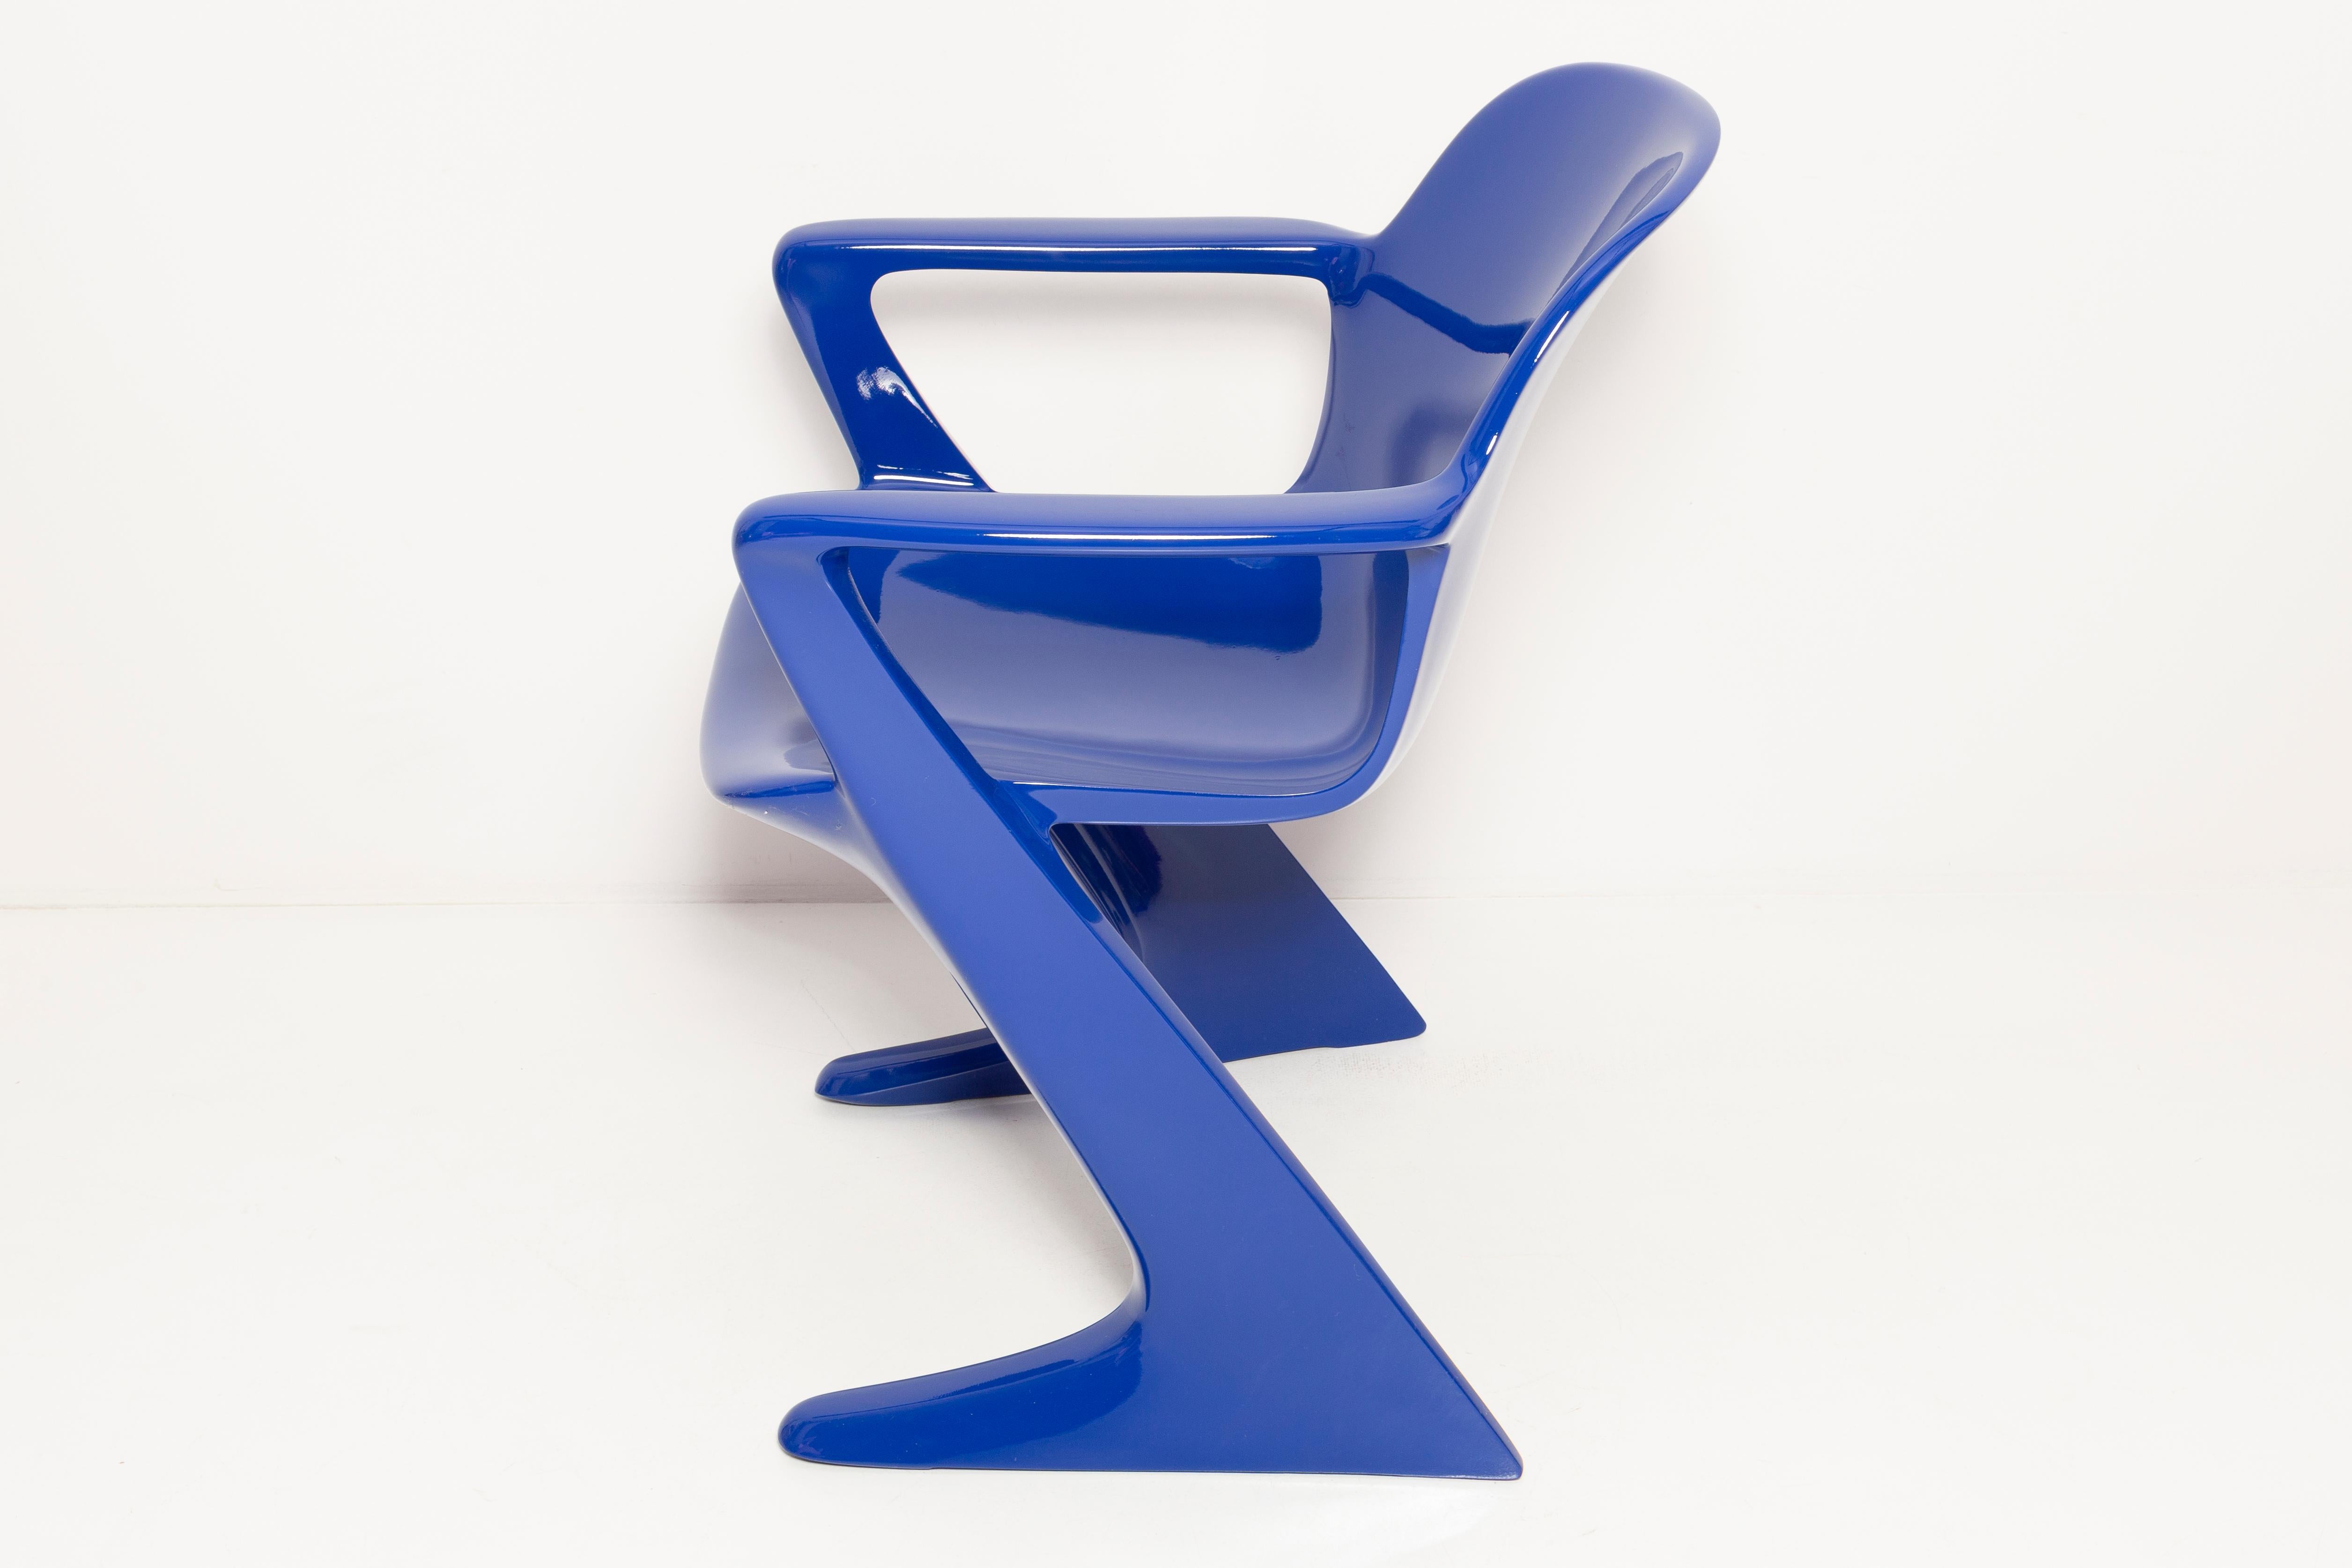 20th Century Ultramarine Blue Kangaroo Chair Designed by Ernst Moeckl, Germany, 1968 For Sale